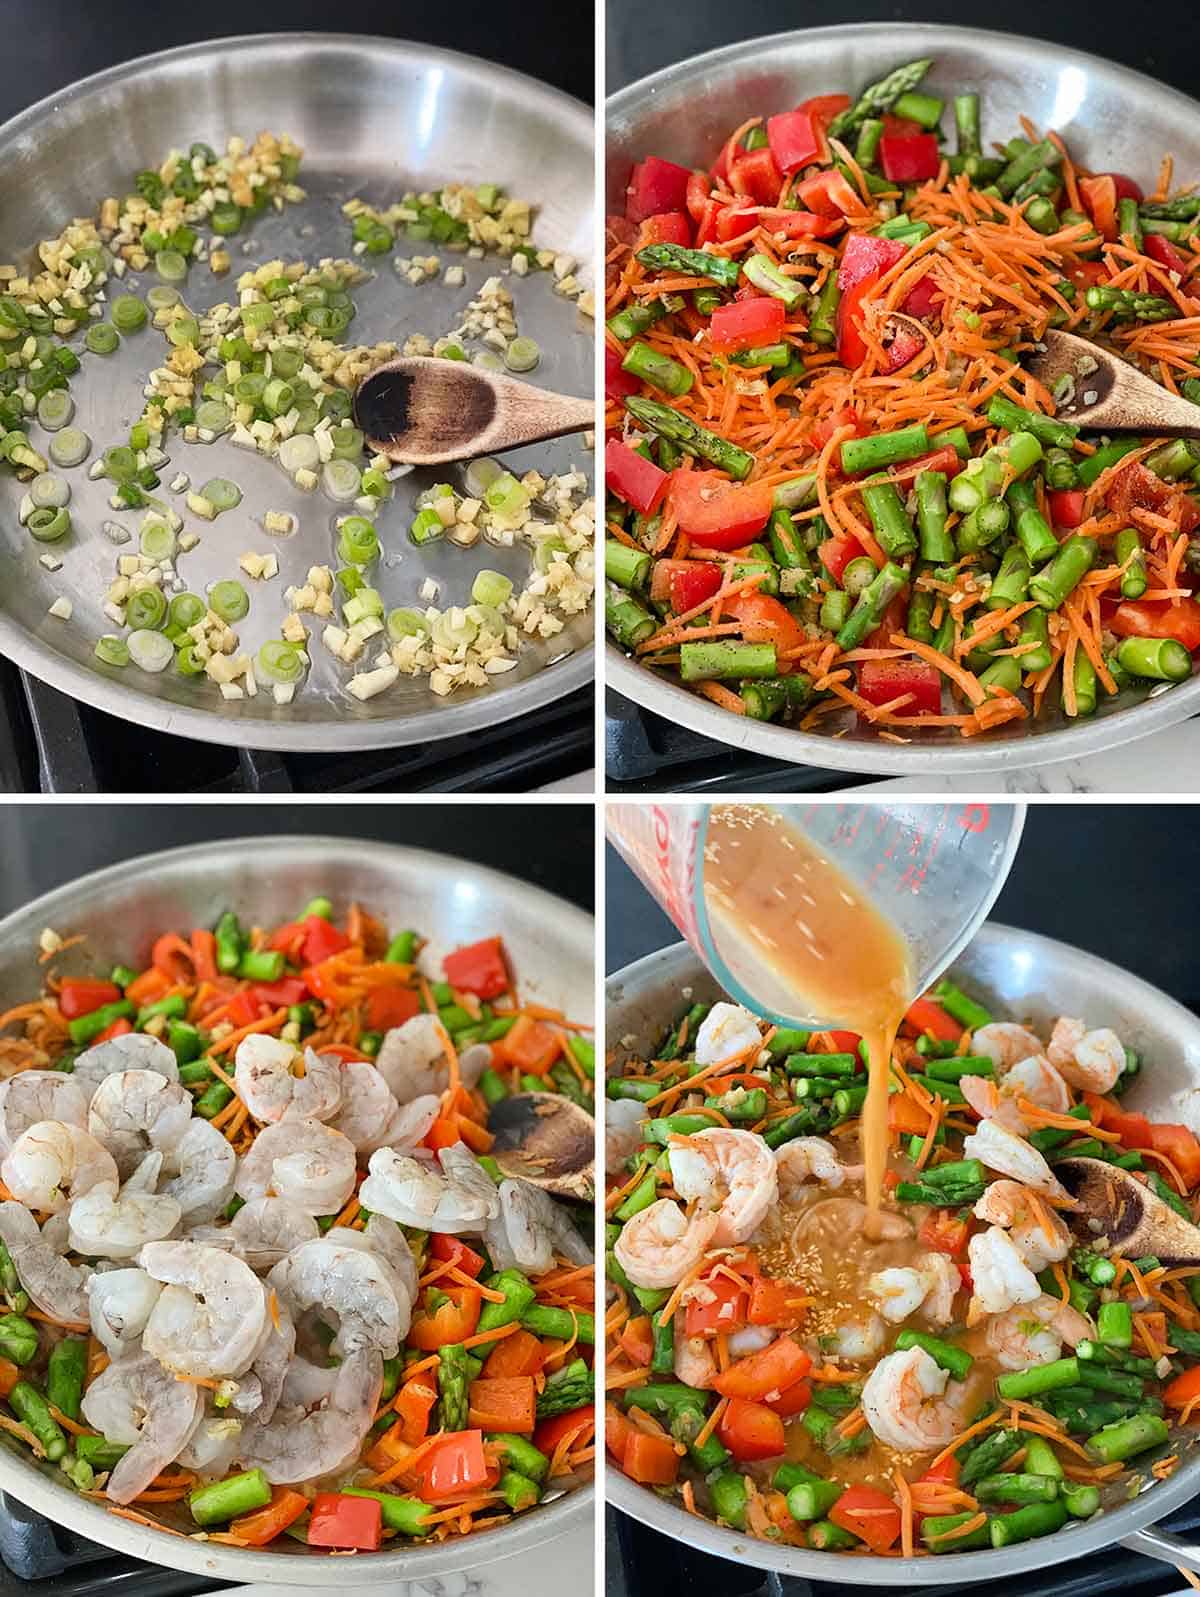 Process collage showing how to make shrimp stir fry with garlic, ginger, vegetables, and sauce in a skillet.